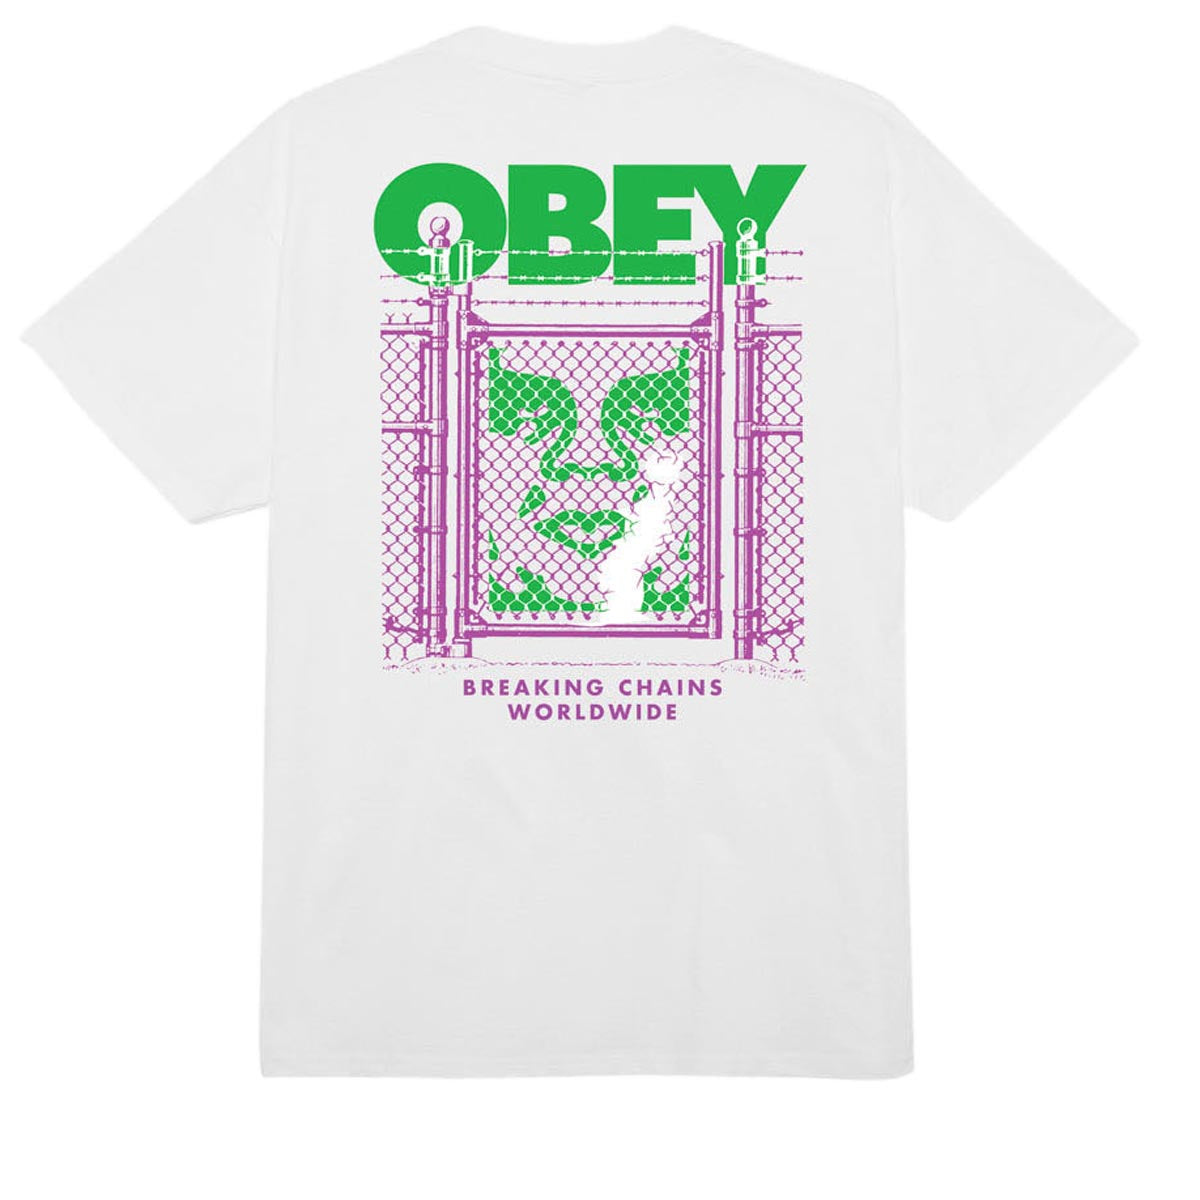 Obey Chain Link Fence Icon T-Shirt - White image 1